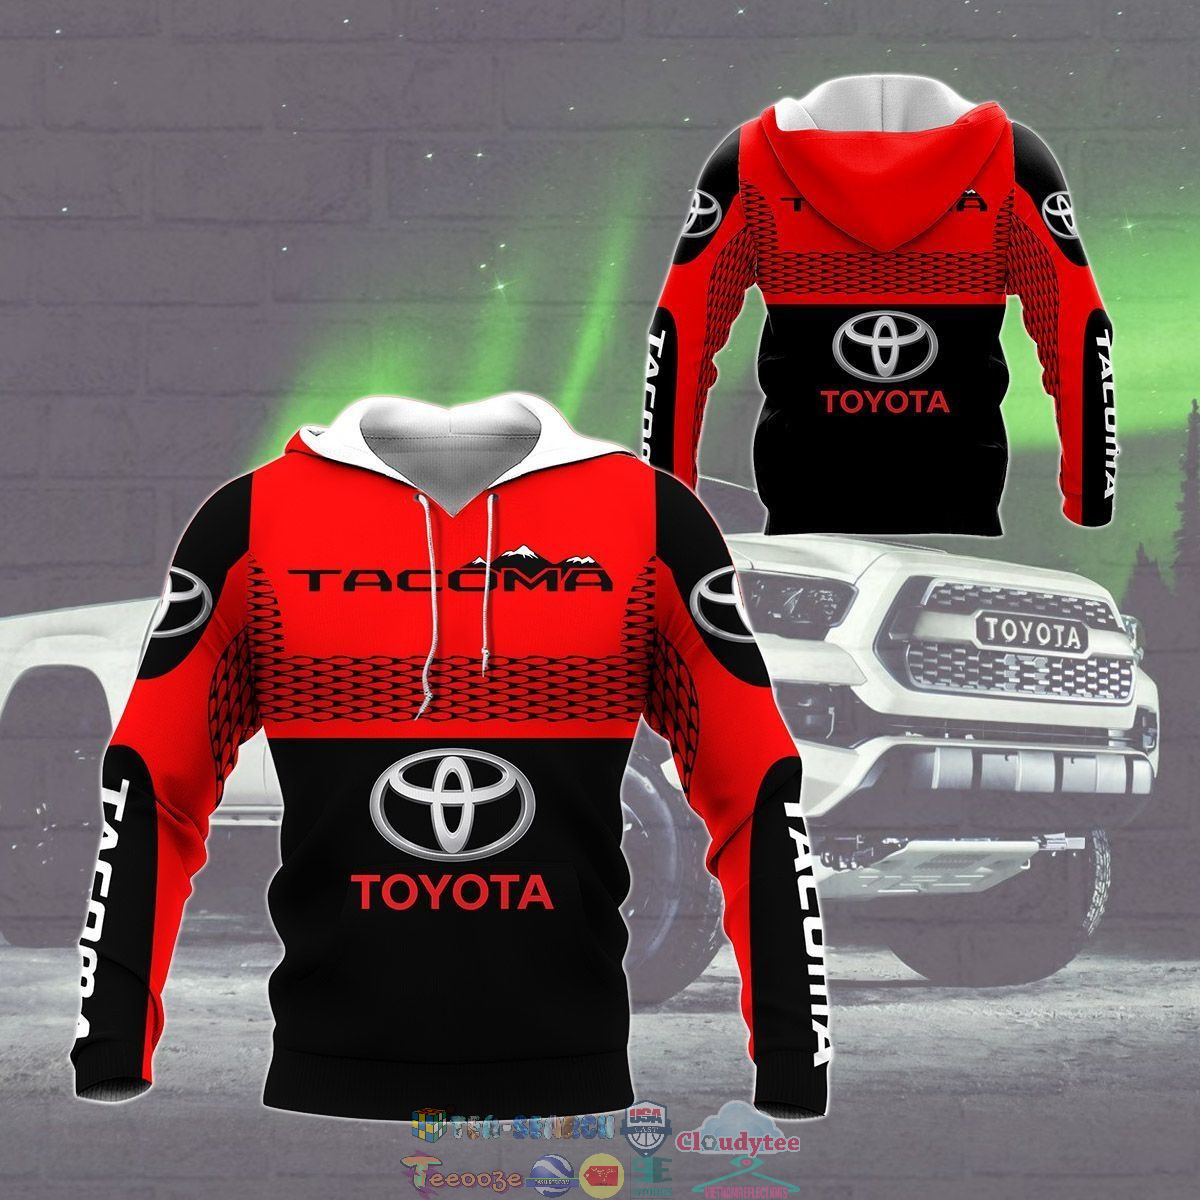 Toyota Tacoma ver 17 3D hoodie and t-shirt